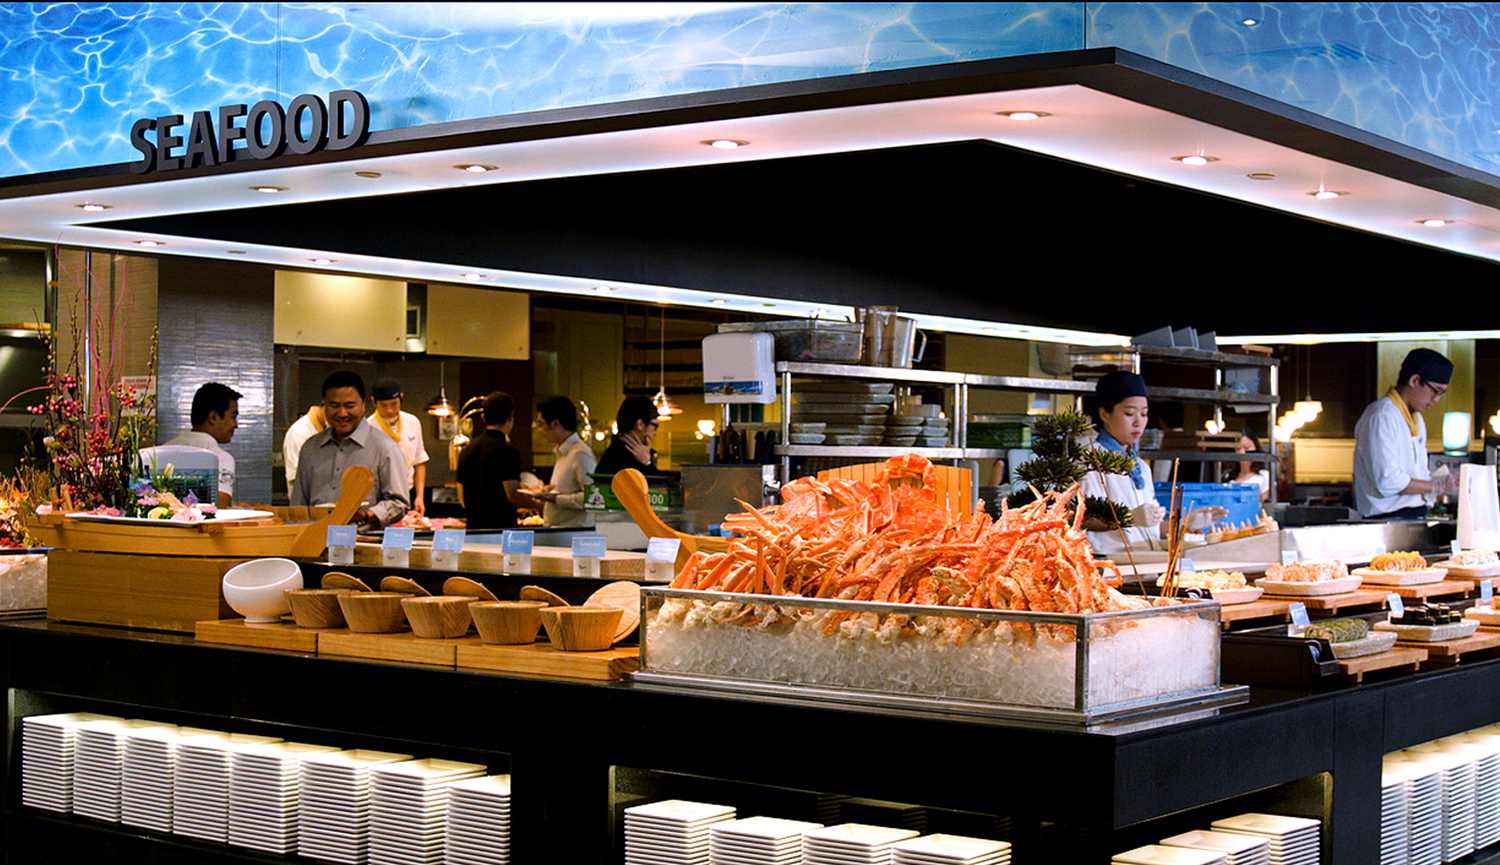 Todai - Sushi & Seafood Buffet Restaurant in Singapore